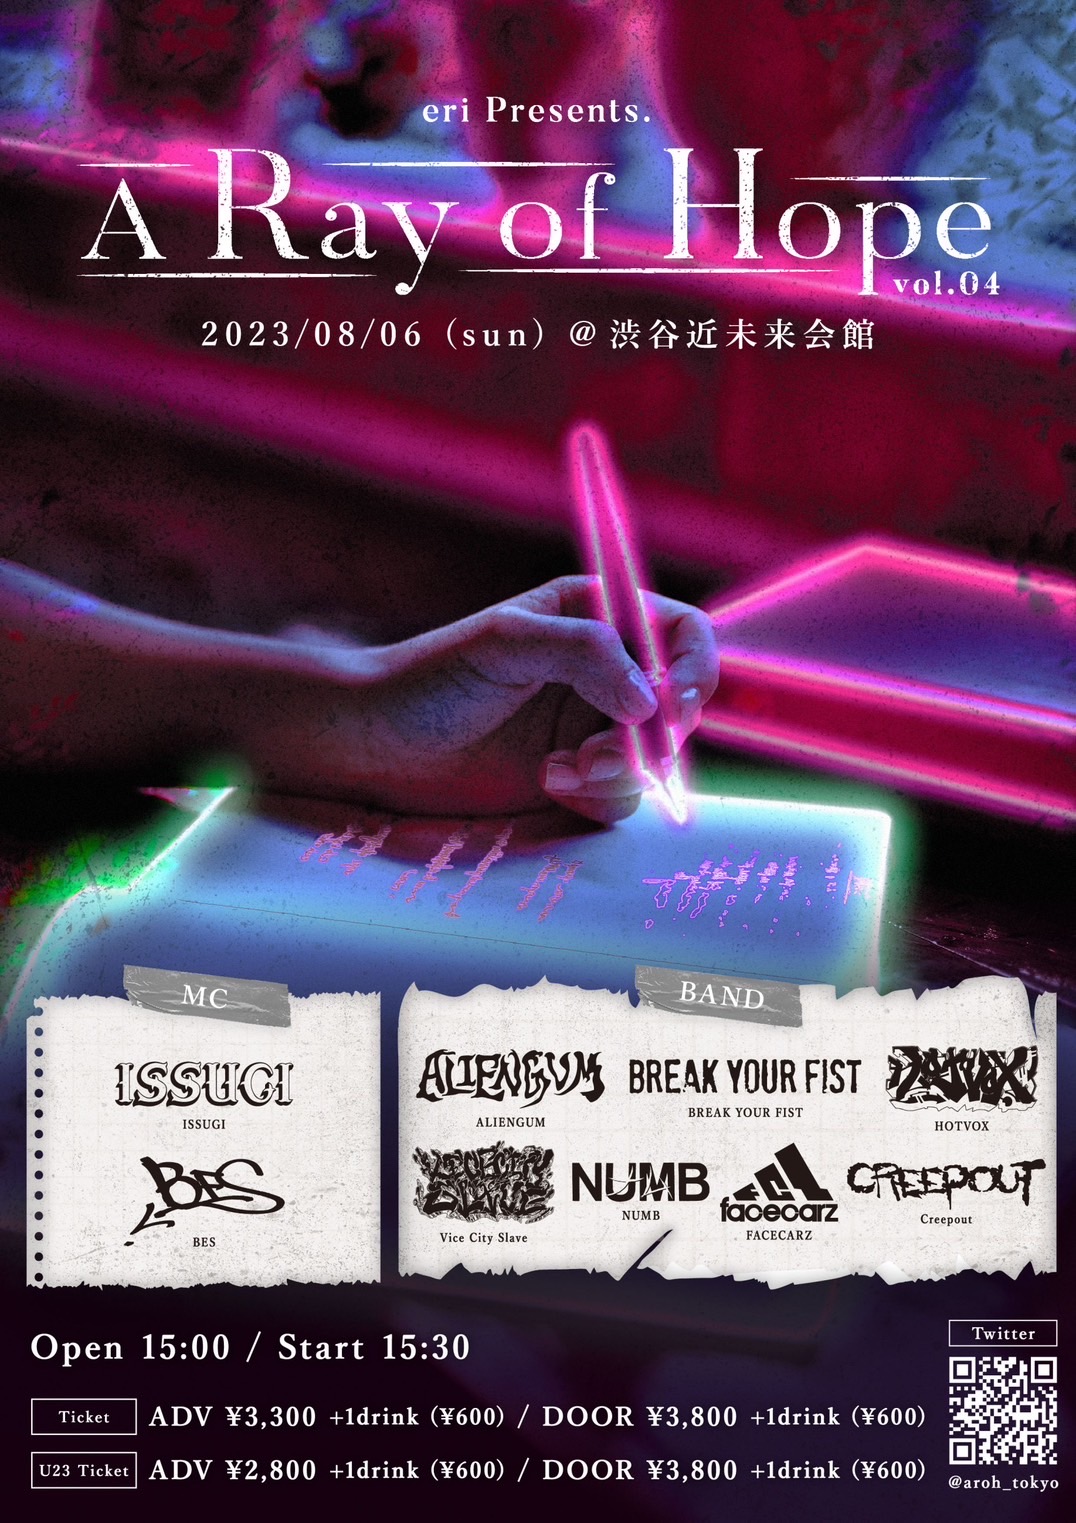 A Ray of Hope vol.04